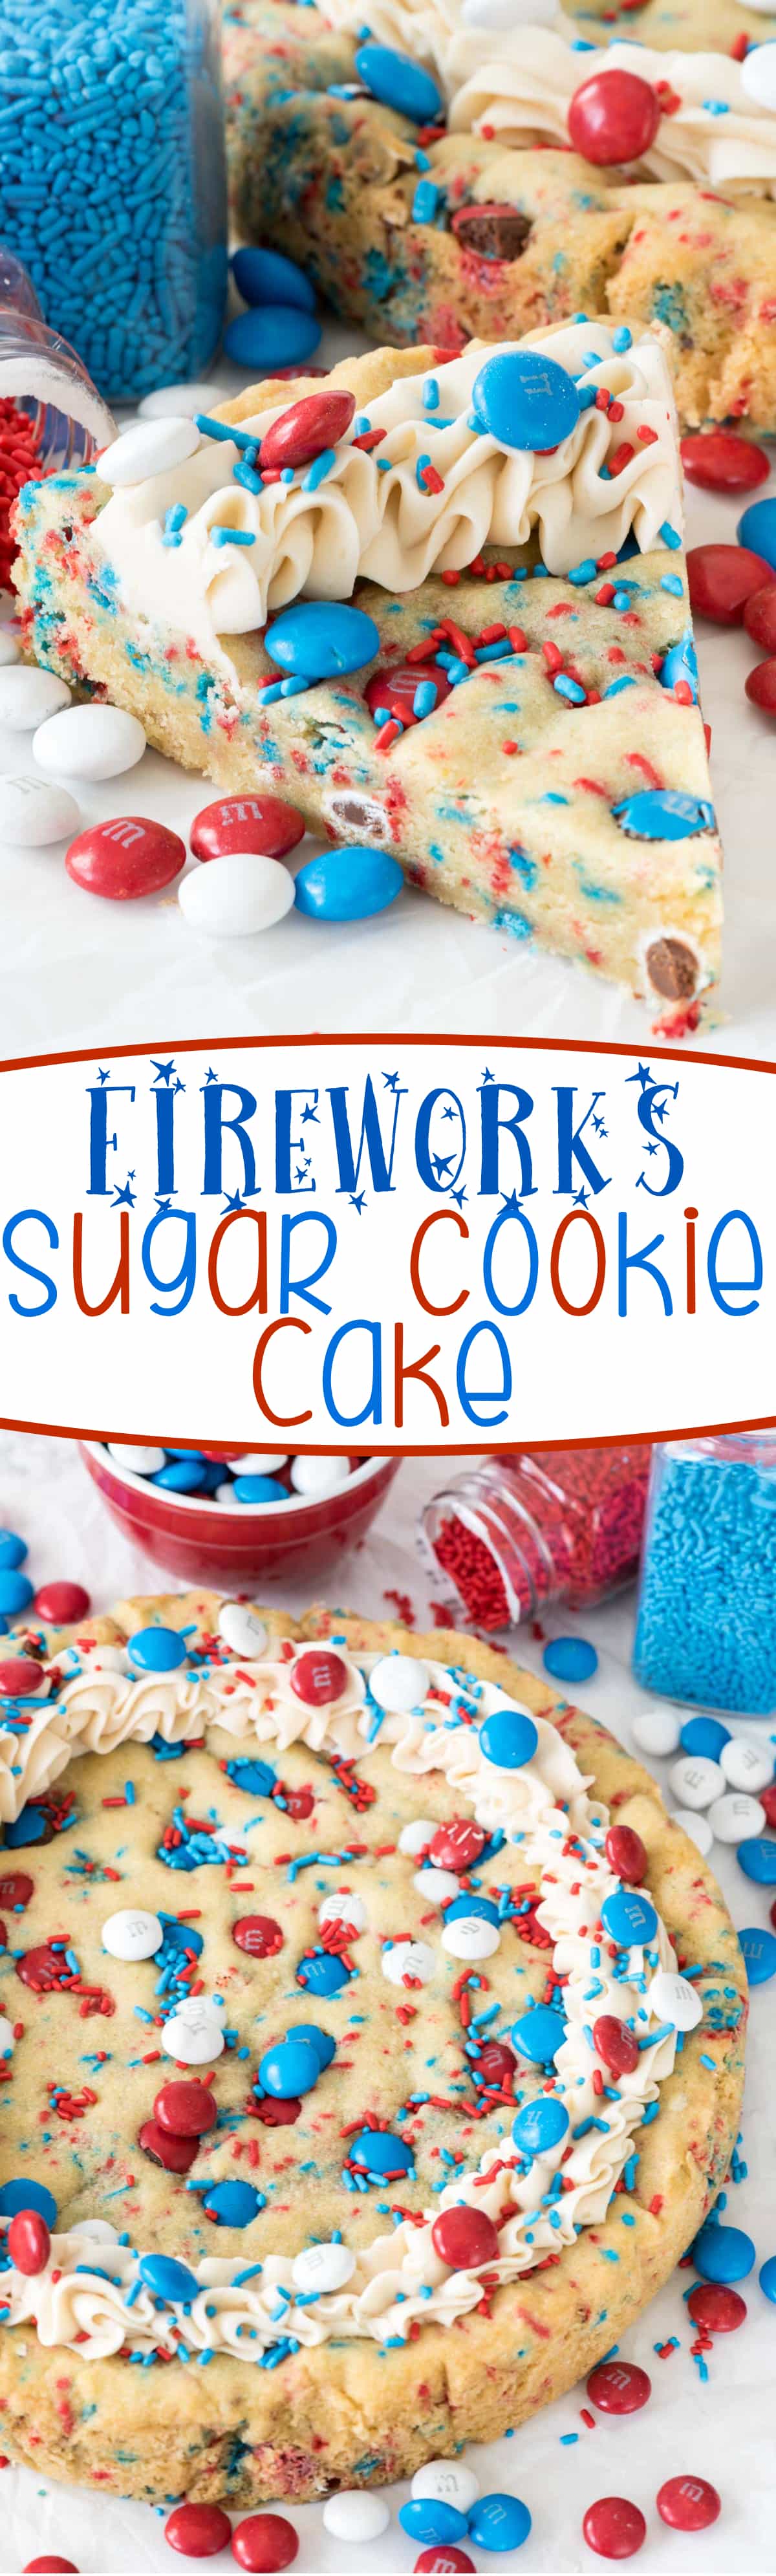 Fireworks Sugar Cookie Cake Recipe - this EASY sugar cookie recipe is made in a cake pan! Such a great dessert for the 4th of July!